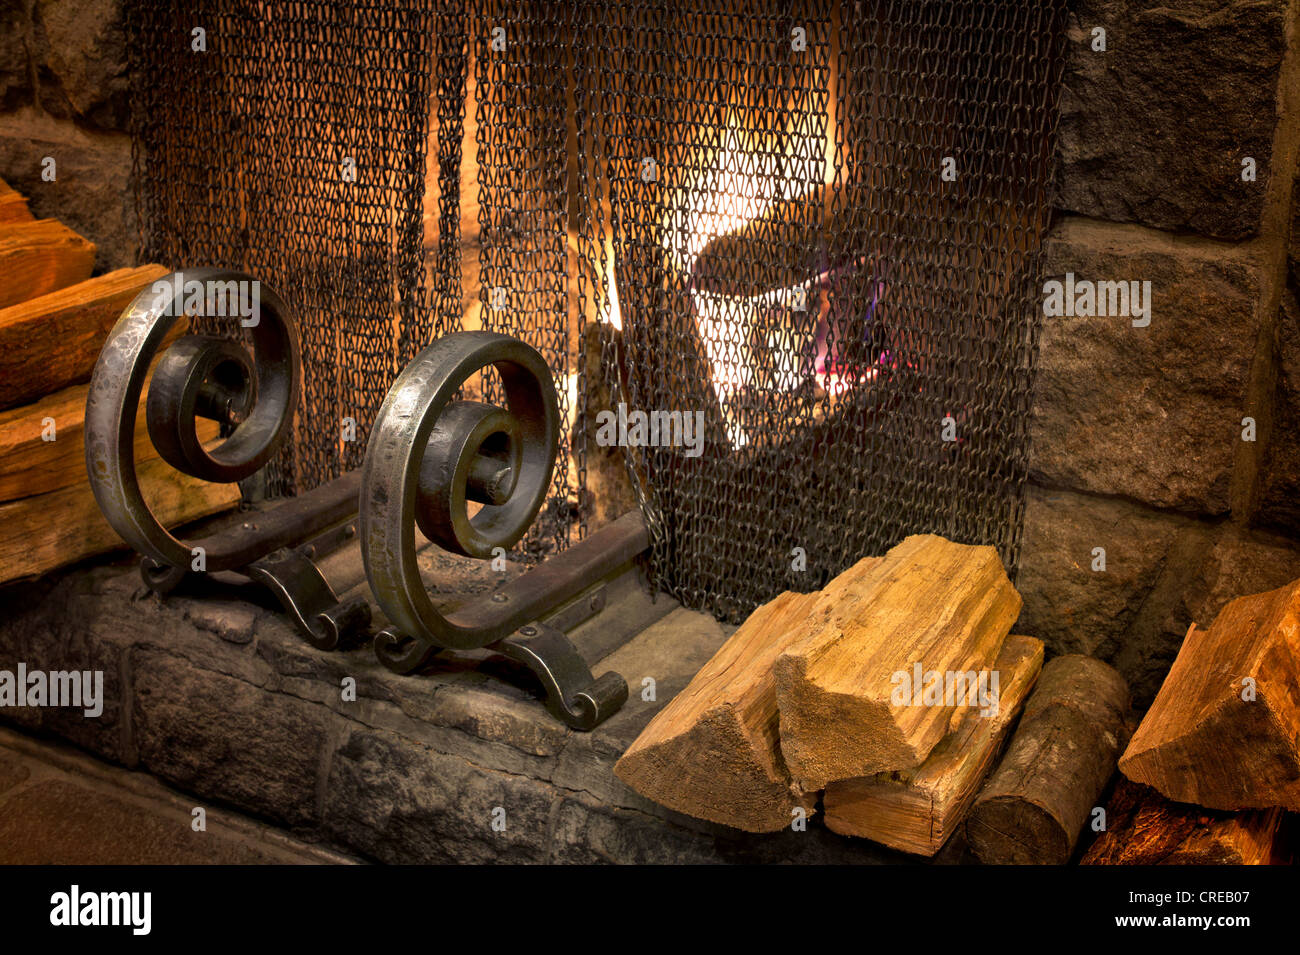 Fire in fireplace with wrought iron grate. Timberline Lodge, Oregon Stock Photo